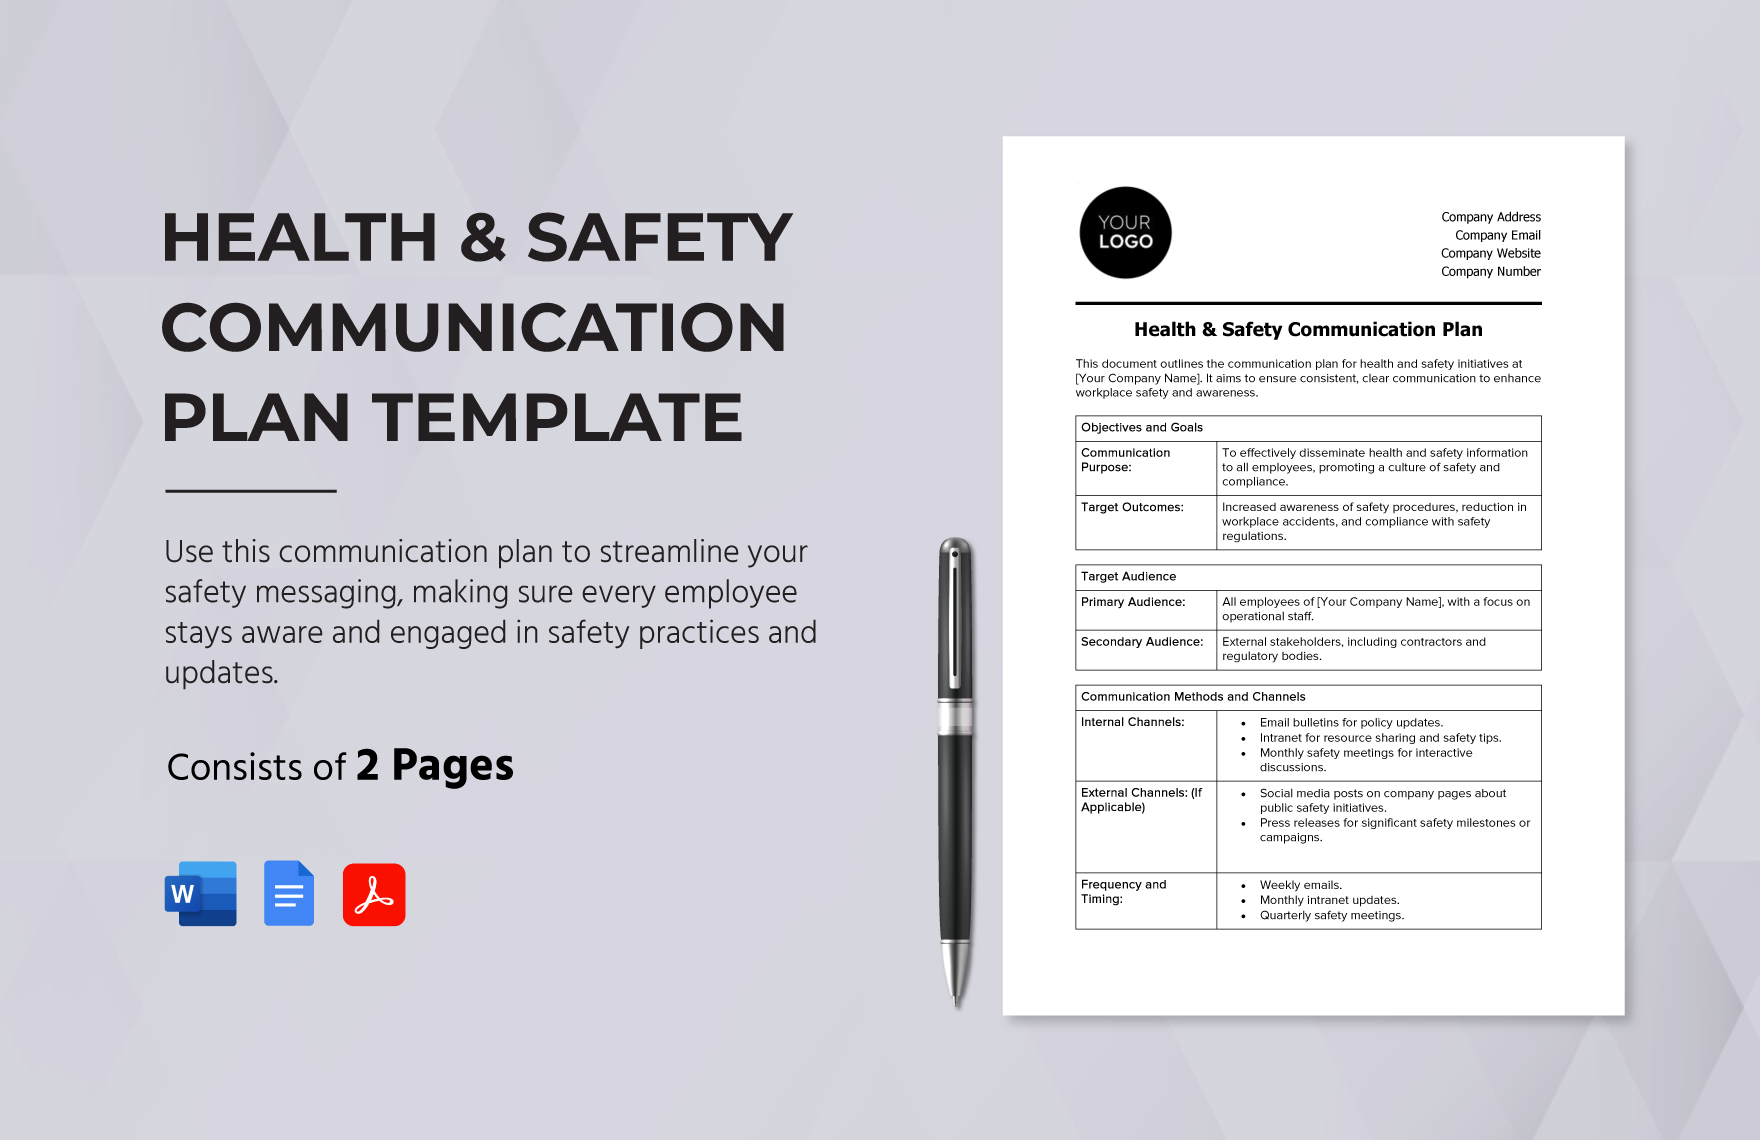 Health & Safety Communication Plan Template